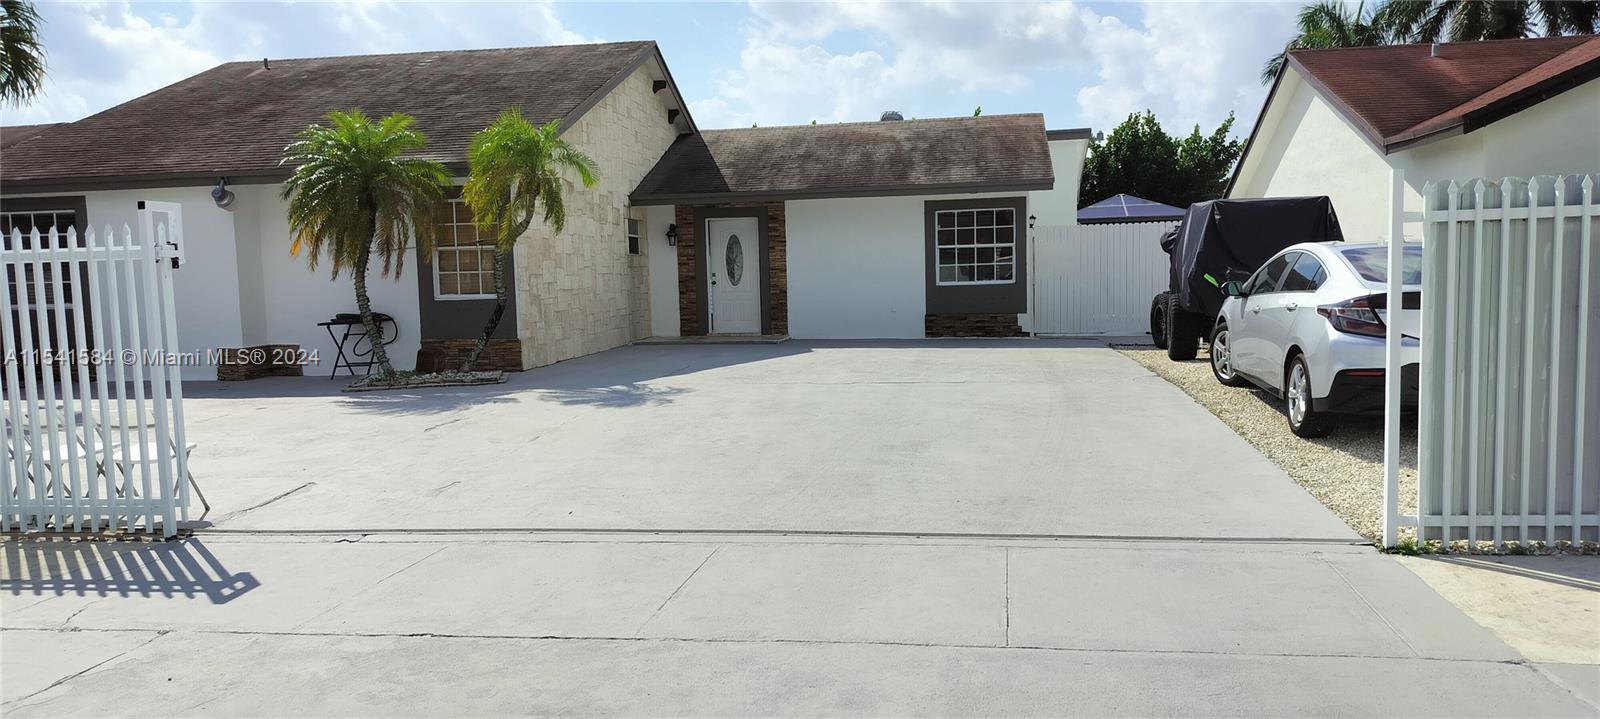 Property for Sale at Address Not Disclosed, Miami, Broward County, Florida - Bedrooms: 4 
Bathrooms: 2  - $589,000